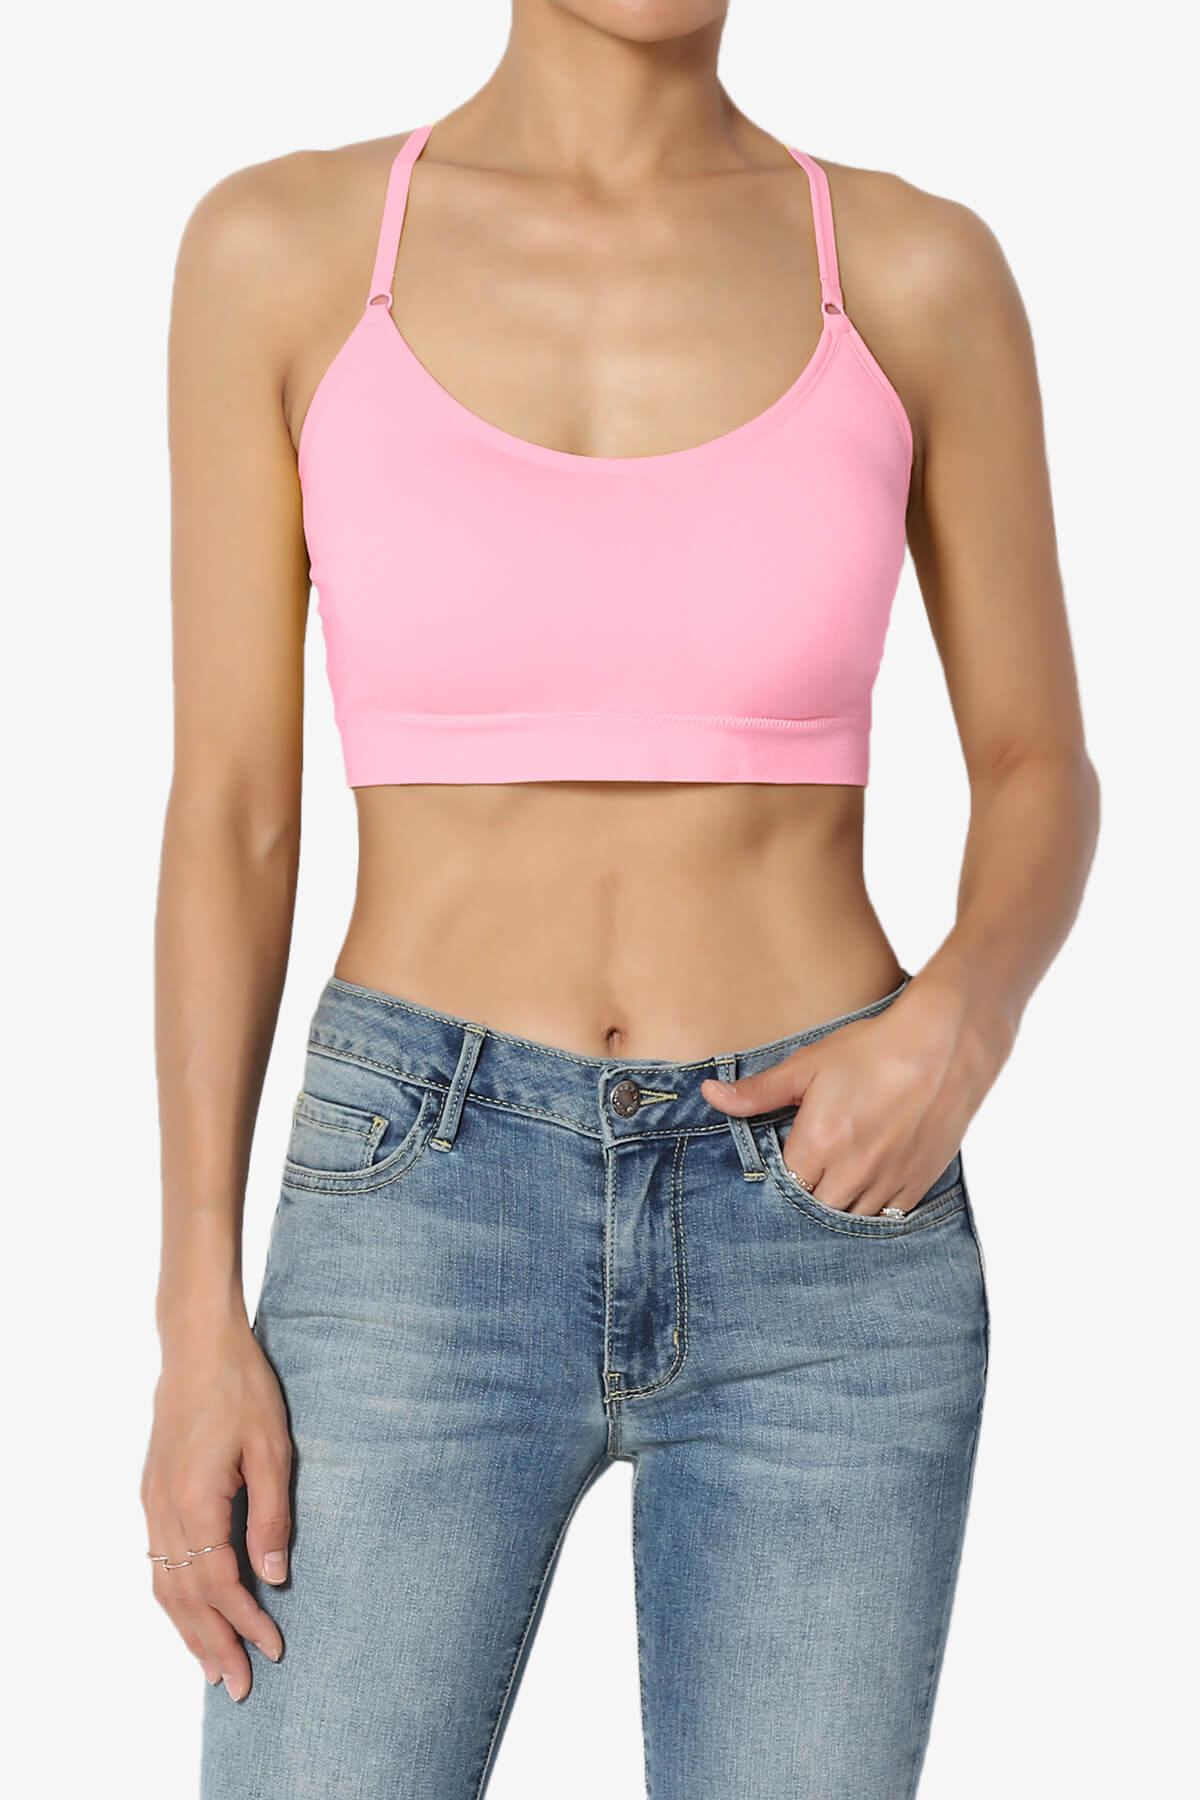 Load image into Gallery viewer, Dassie Padded Cross Back Bra Top BRIGHT PINK_1
